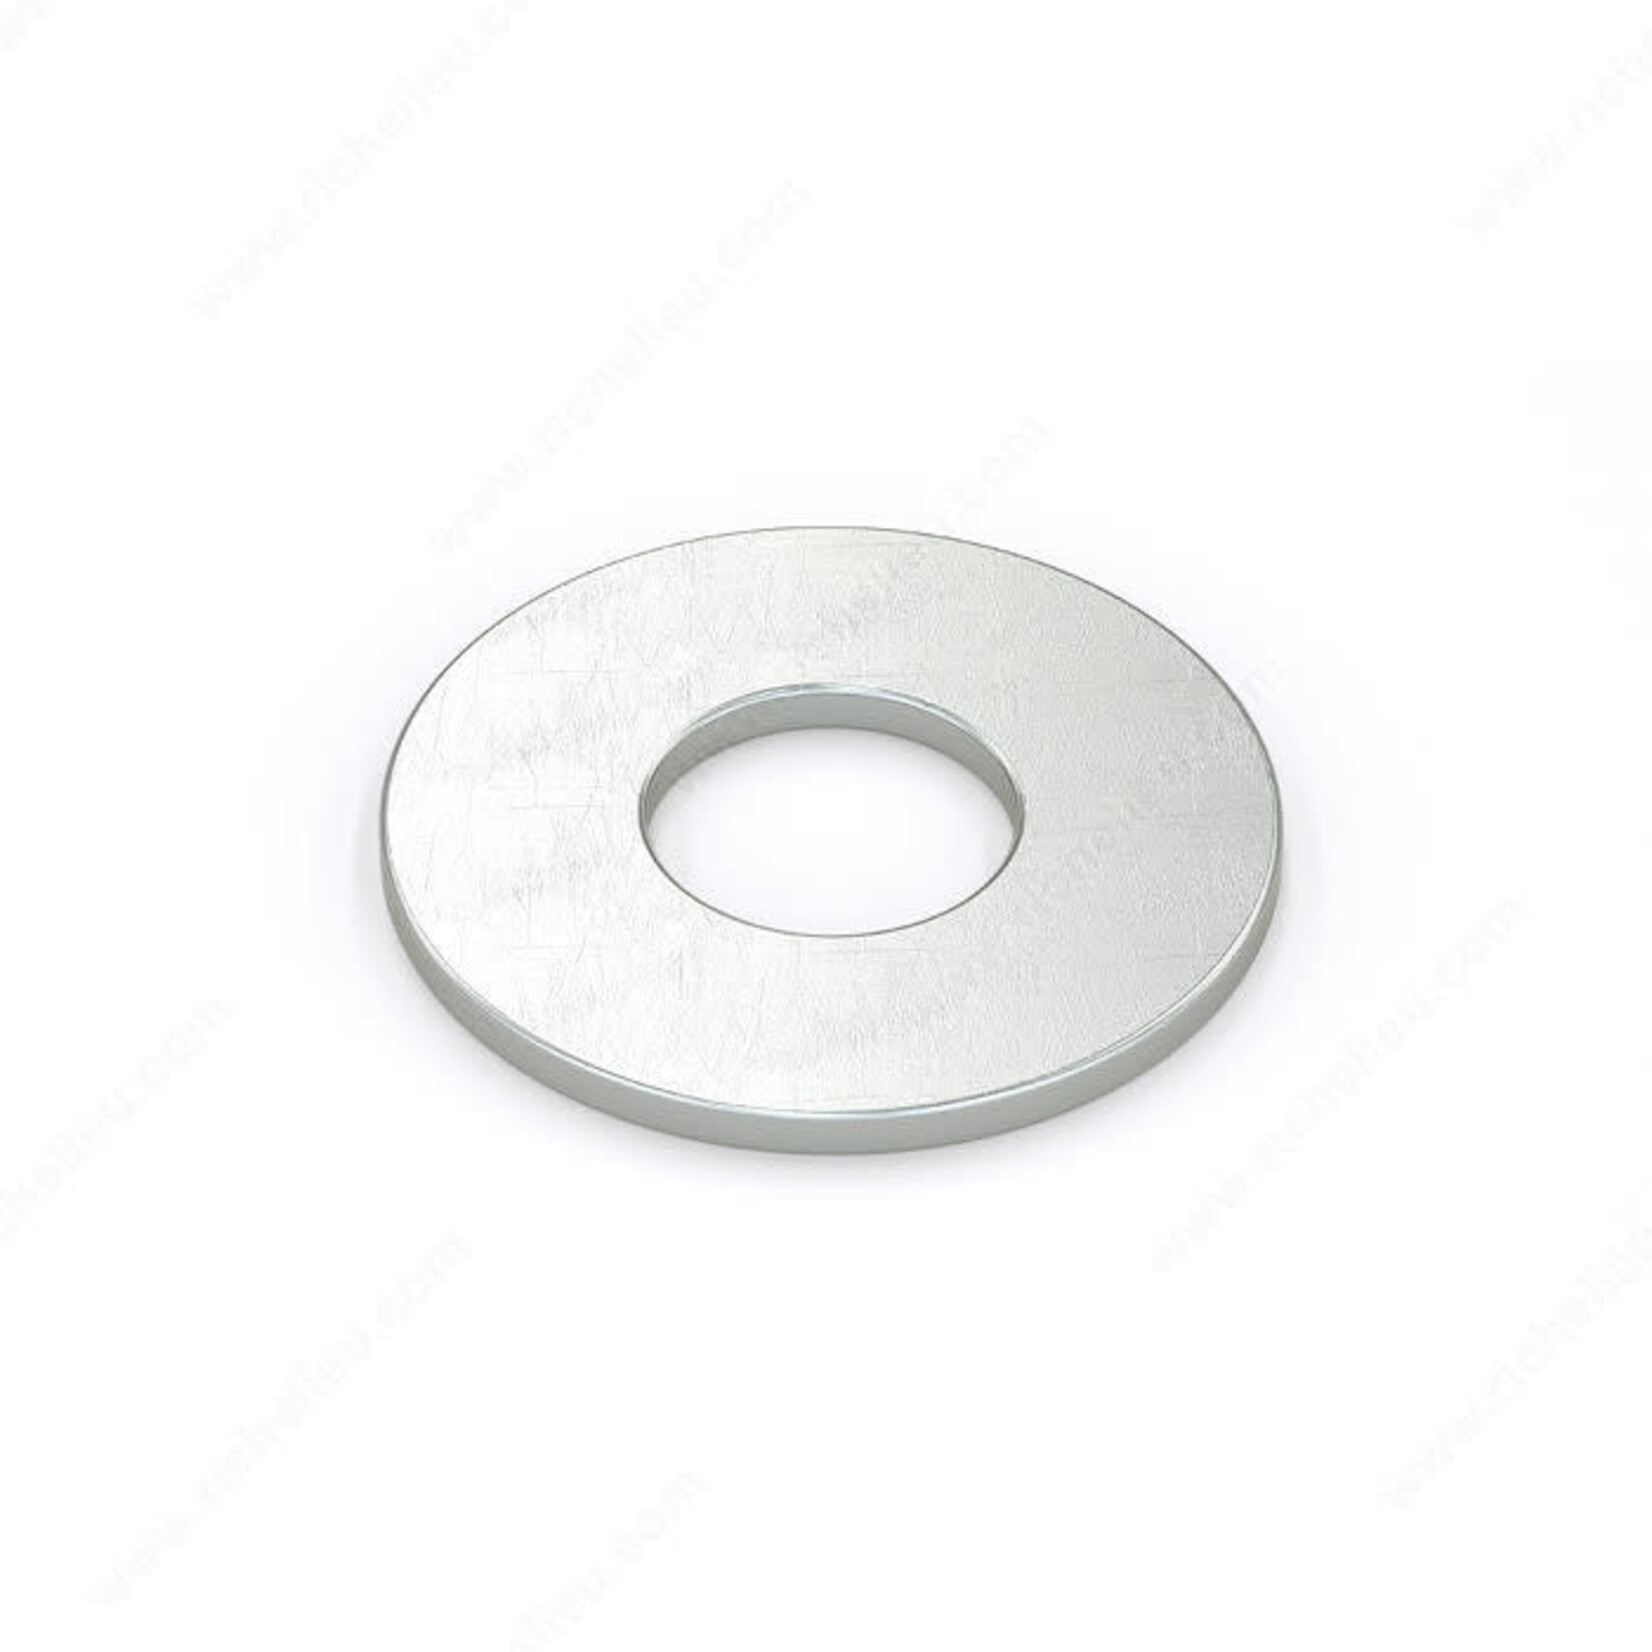 RELIABLE FLAT WASHER 3/16IN,100PK